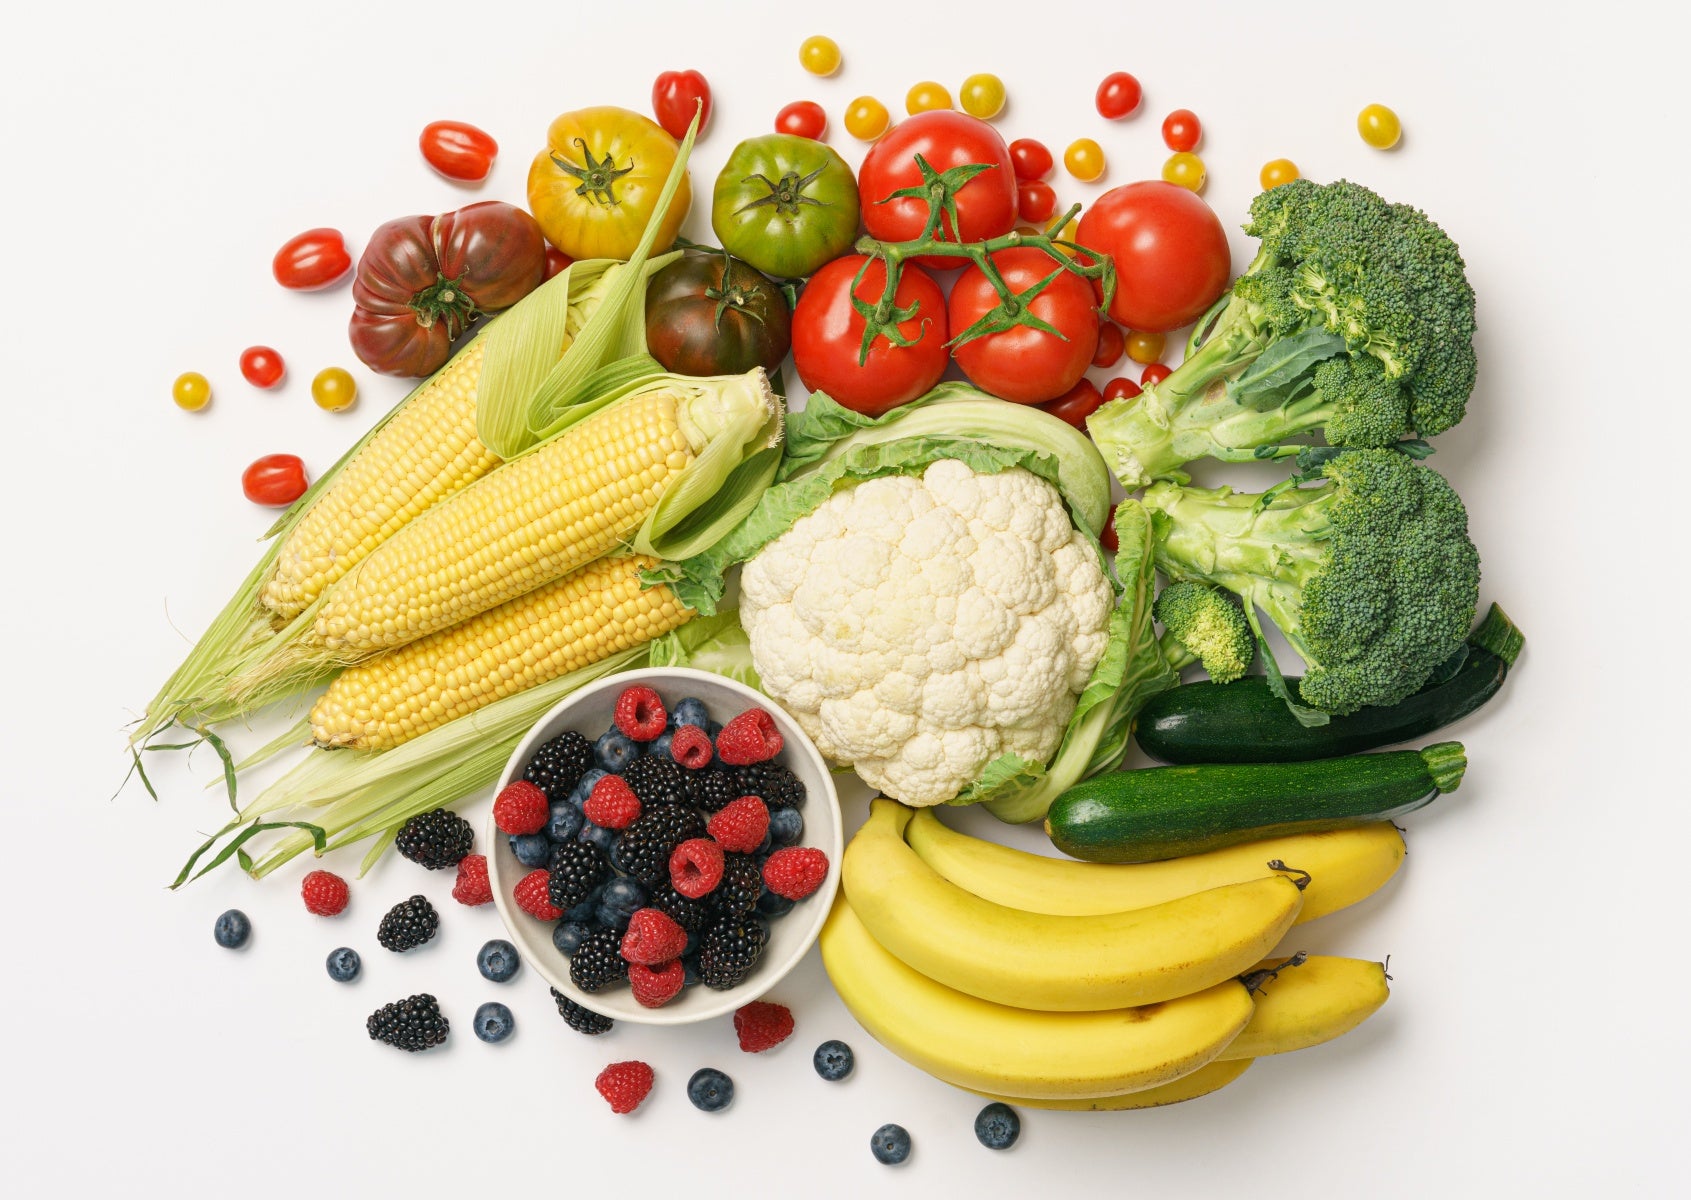 A photograph of bananas, broccoli, berries, cauliflower, corn, tomatoes and zucchini on a white background